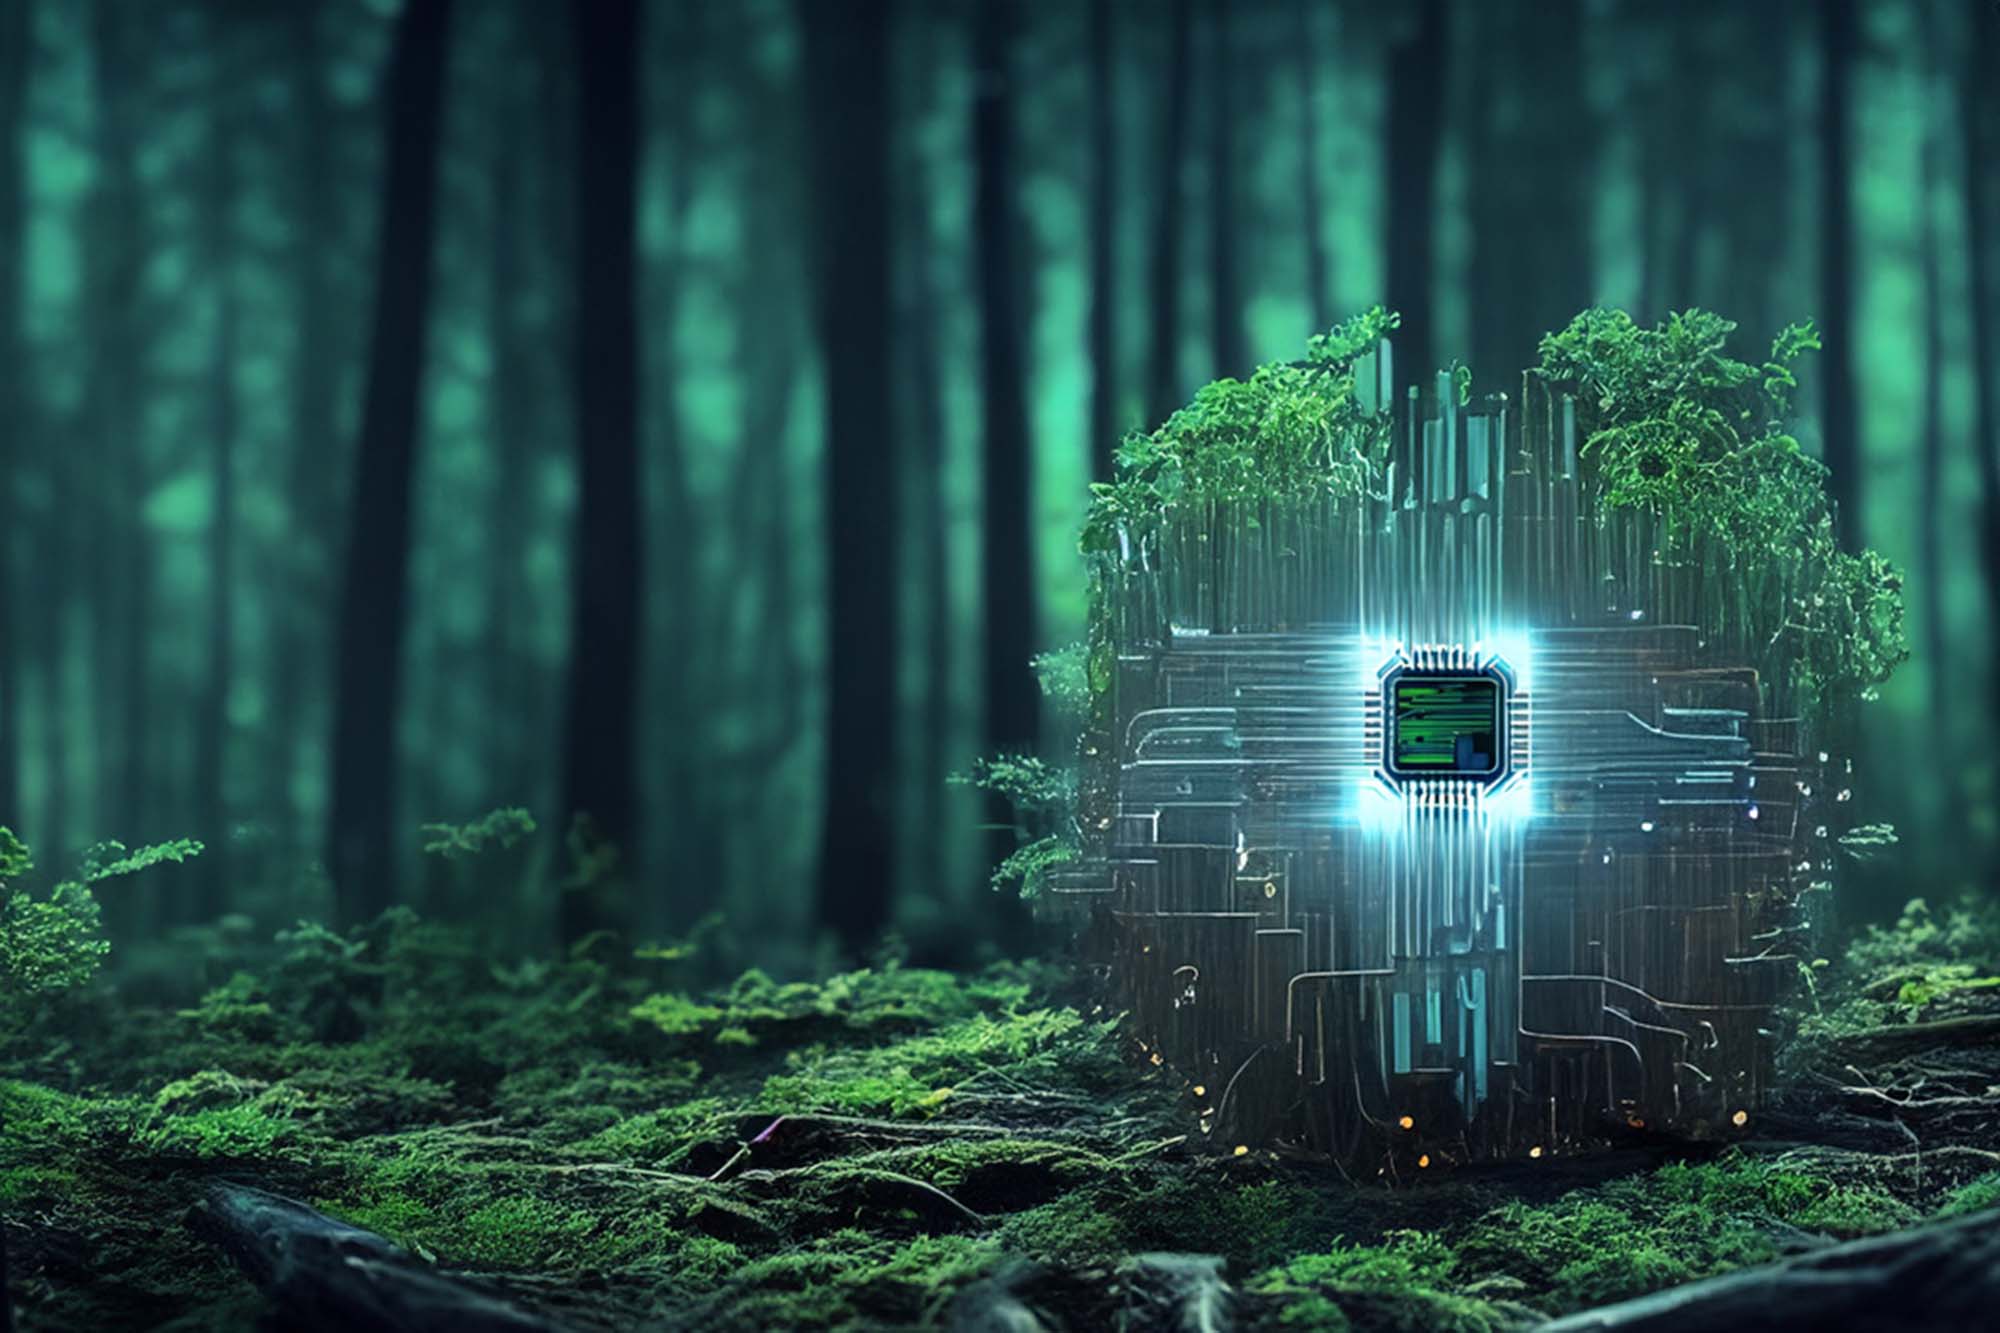 A stylized graphic image of a semiconductor chip integrated into plant matter glows in a forest.